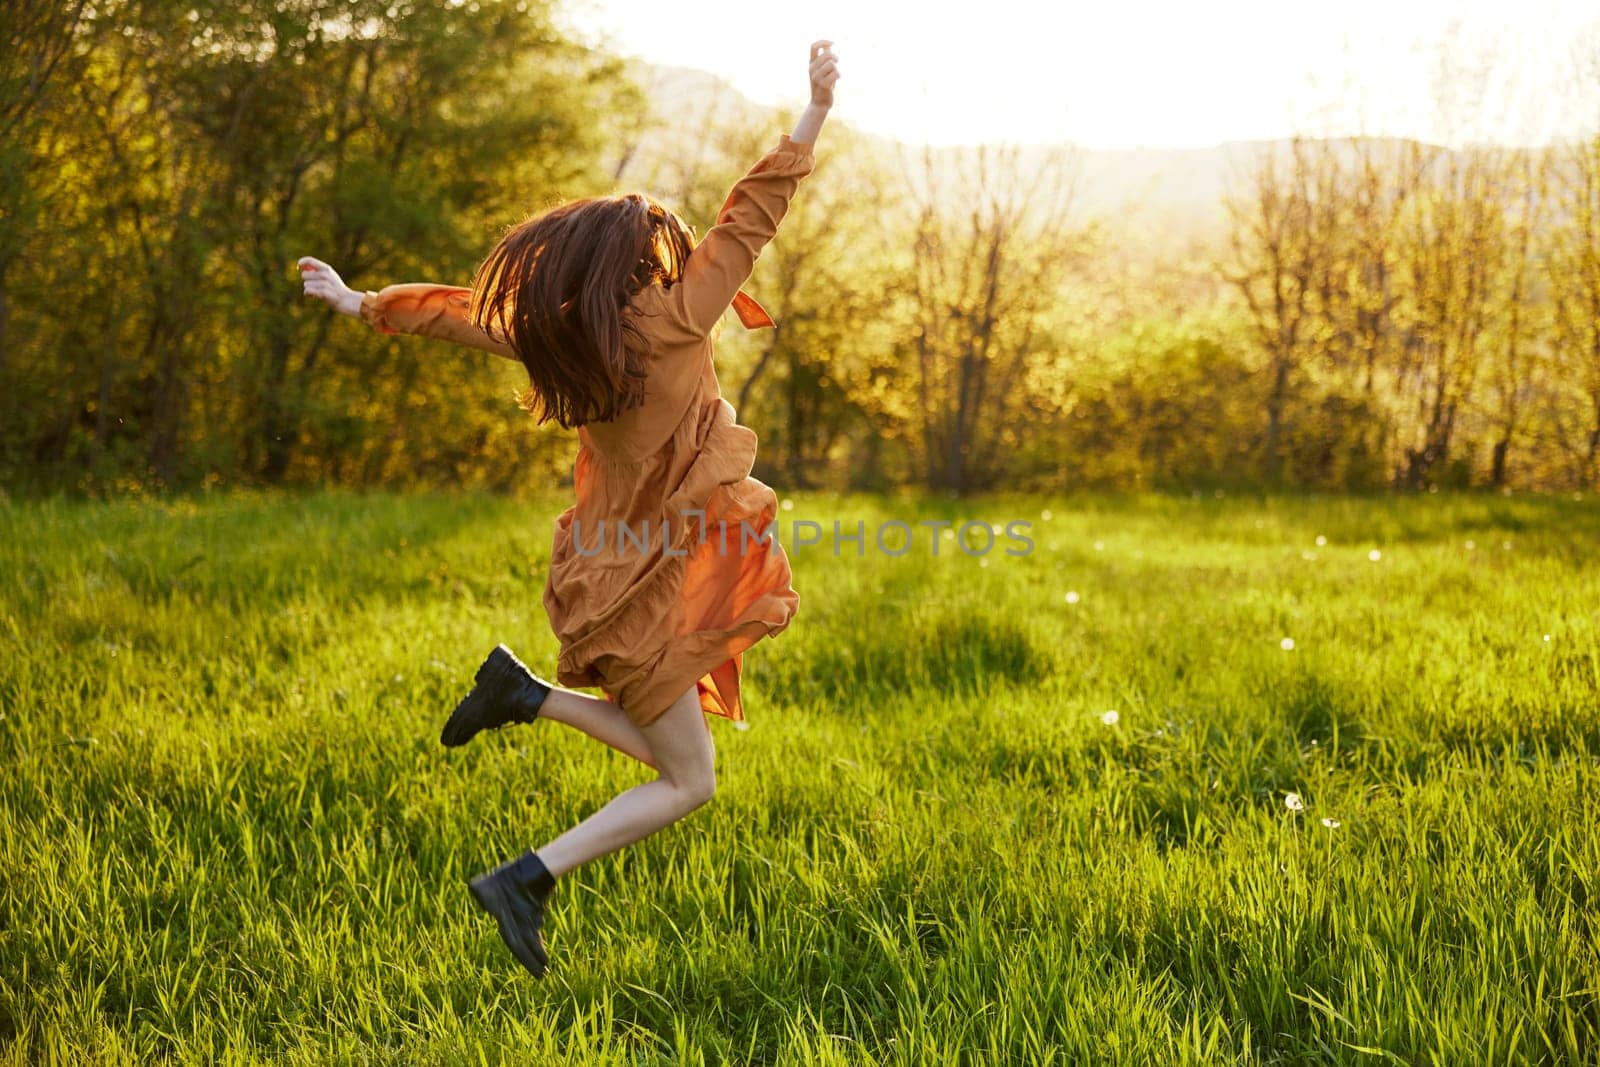 a happy woman in an orange dress illuminated by the rays of the setting sun happily jumps in a green field in the park, enjoying nature and a warm summer day. Horizontal photo by Vichizh